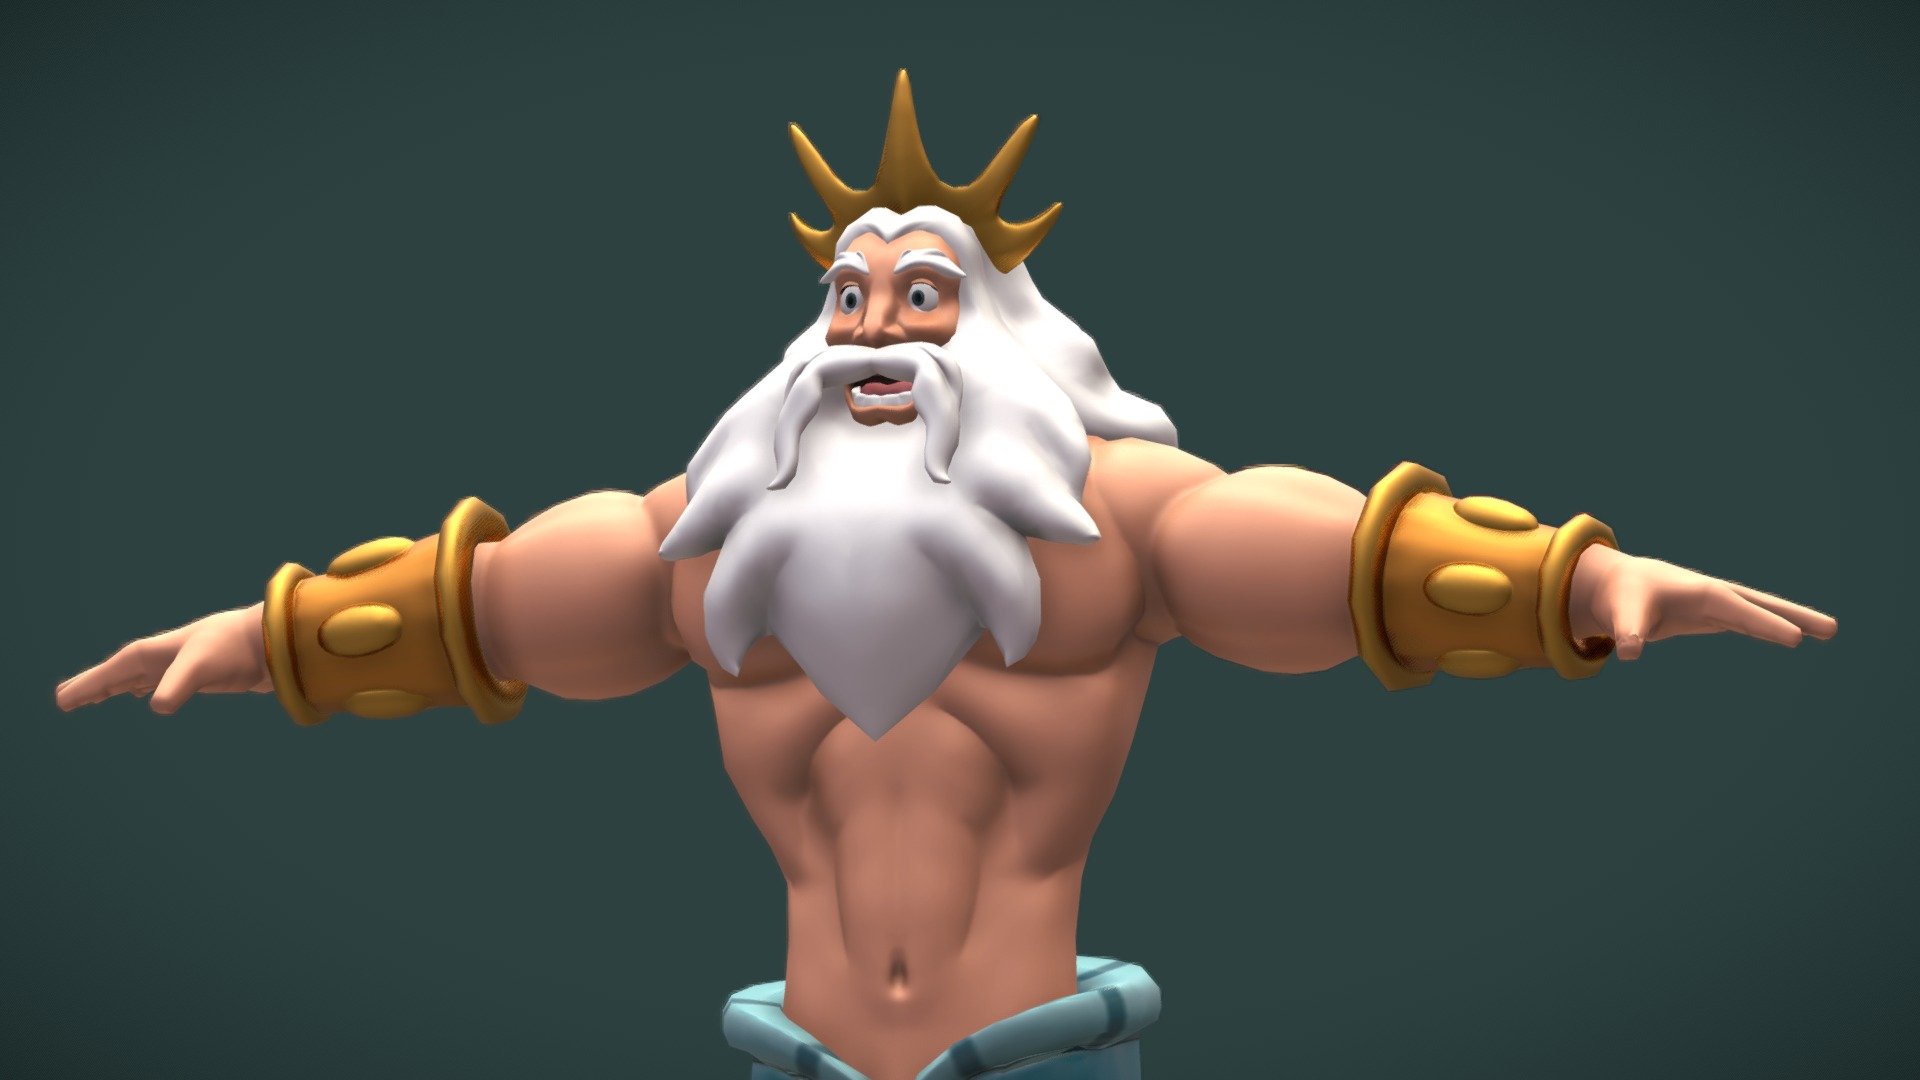 I made king Triton from &lsquo;The little mermaid' movie. I first had to draw the character in good reference poses and then went on to sculpt him in Zbrush, after that I did the retopo in 3DsMAx amd finally added the textures with substance painter. I was inspired by the Gameloft game: &lsquo;Dreamlight Valley'. I would love to work for them one day 3d model